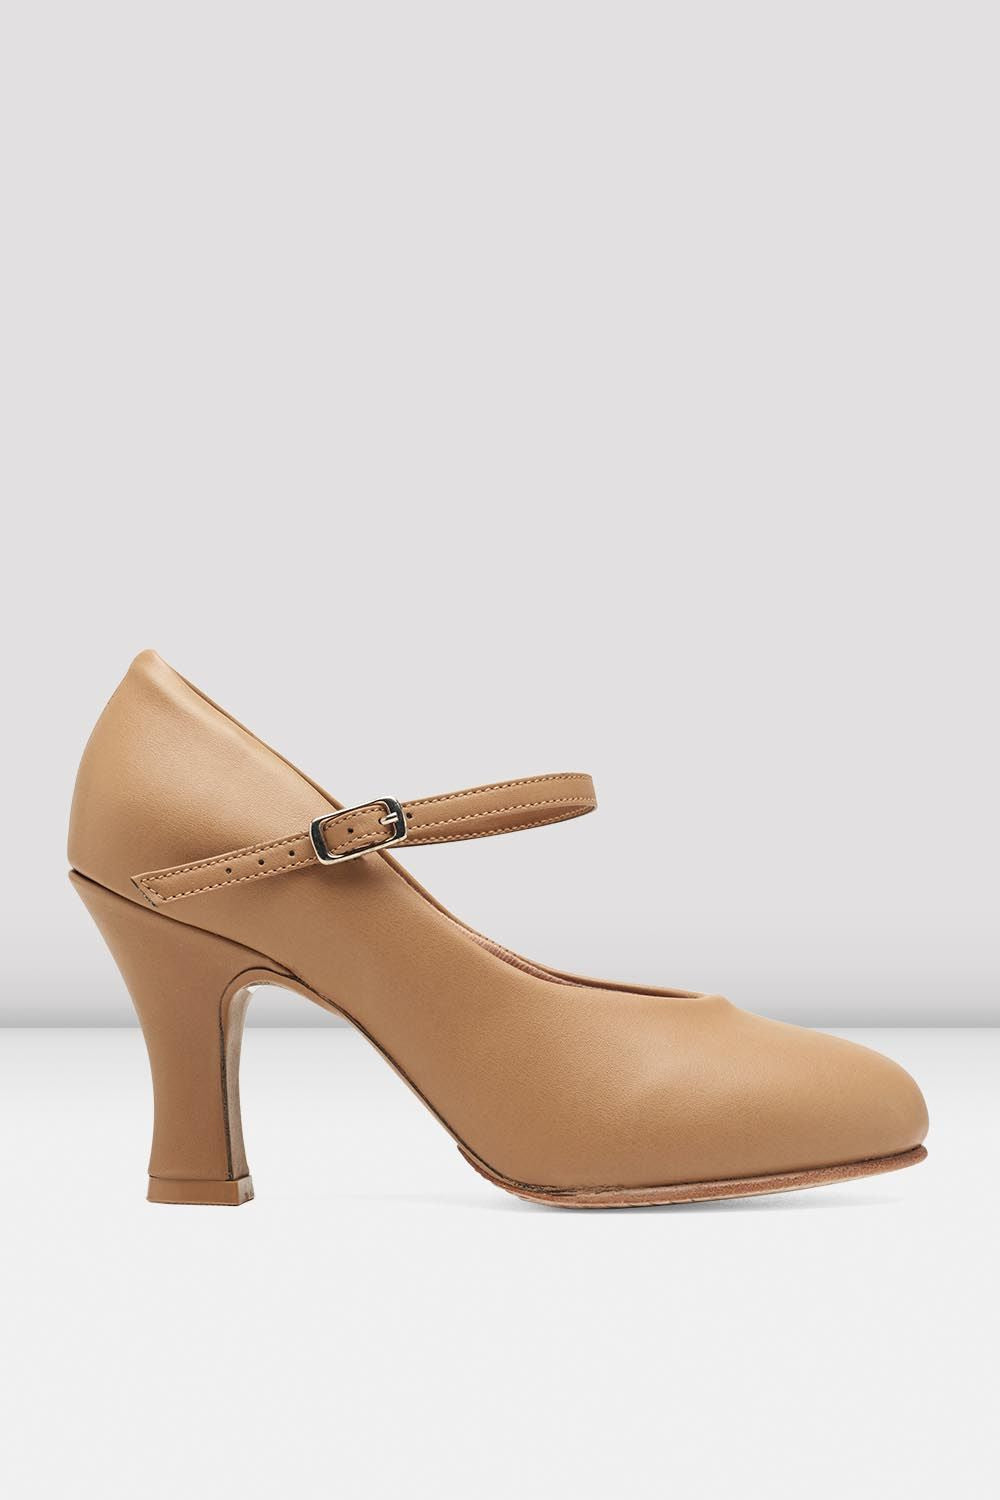 BLOCH Ladies Broadway-Hi Character Shoes, Tan Synthetic Leather